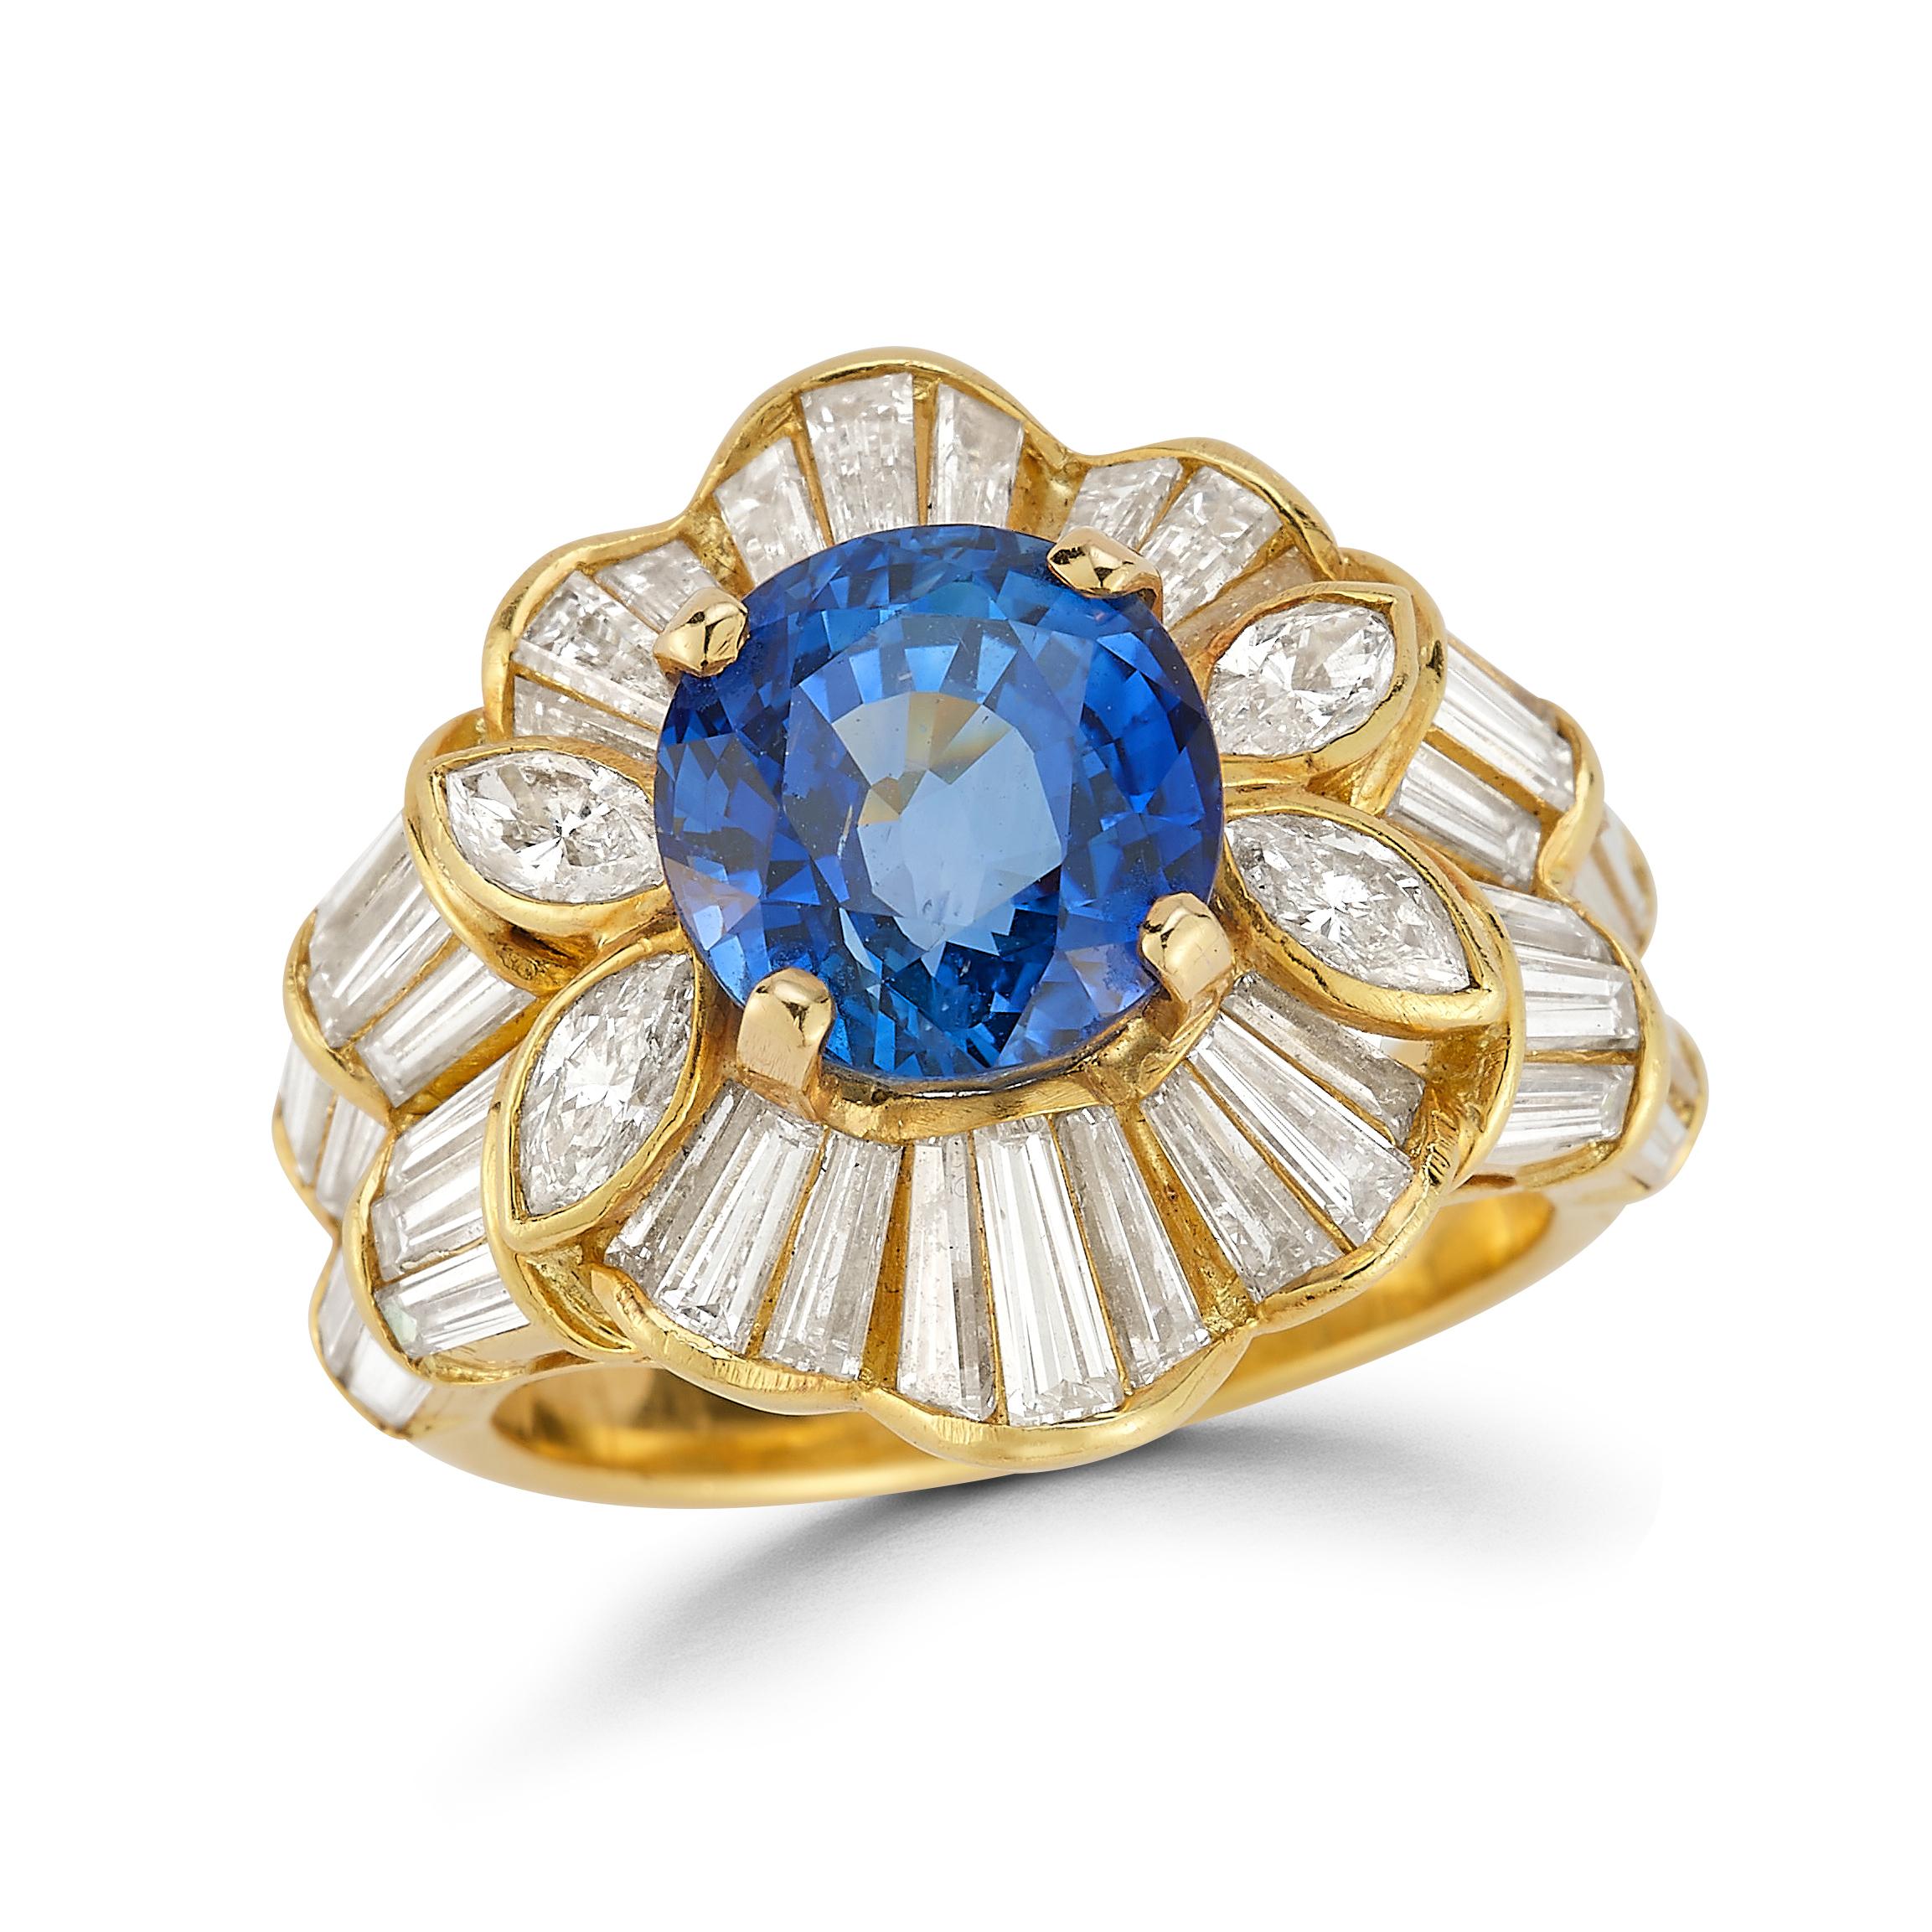 Sapphire & Diamond Ring

An 18 karat yellow gold ring set with an oval cut sapphire framed by marquise and baguette cut diamonds

Accompanied by an AGL report stating that the sapphire is heated and of Ceylon origin

Sapphire Approximate Weight: